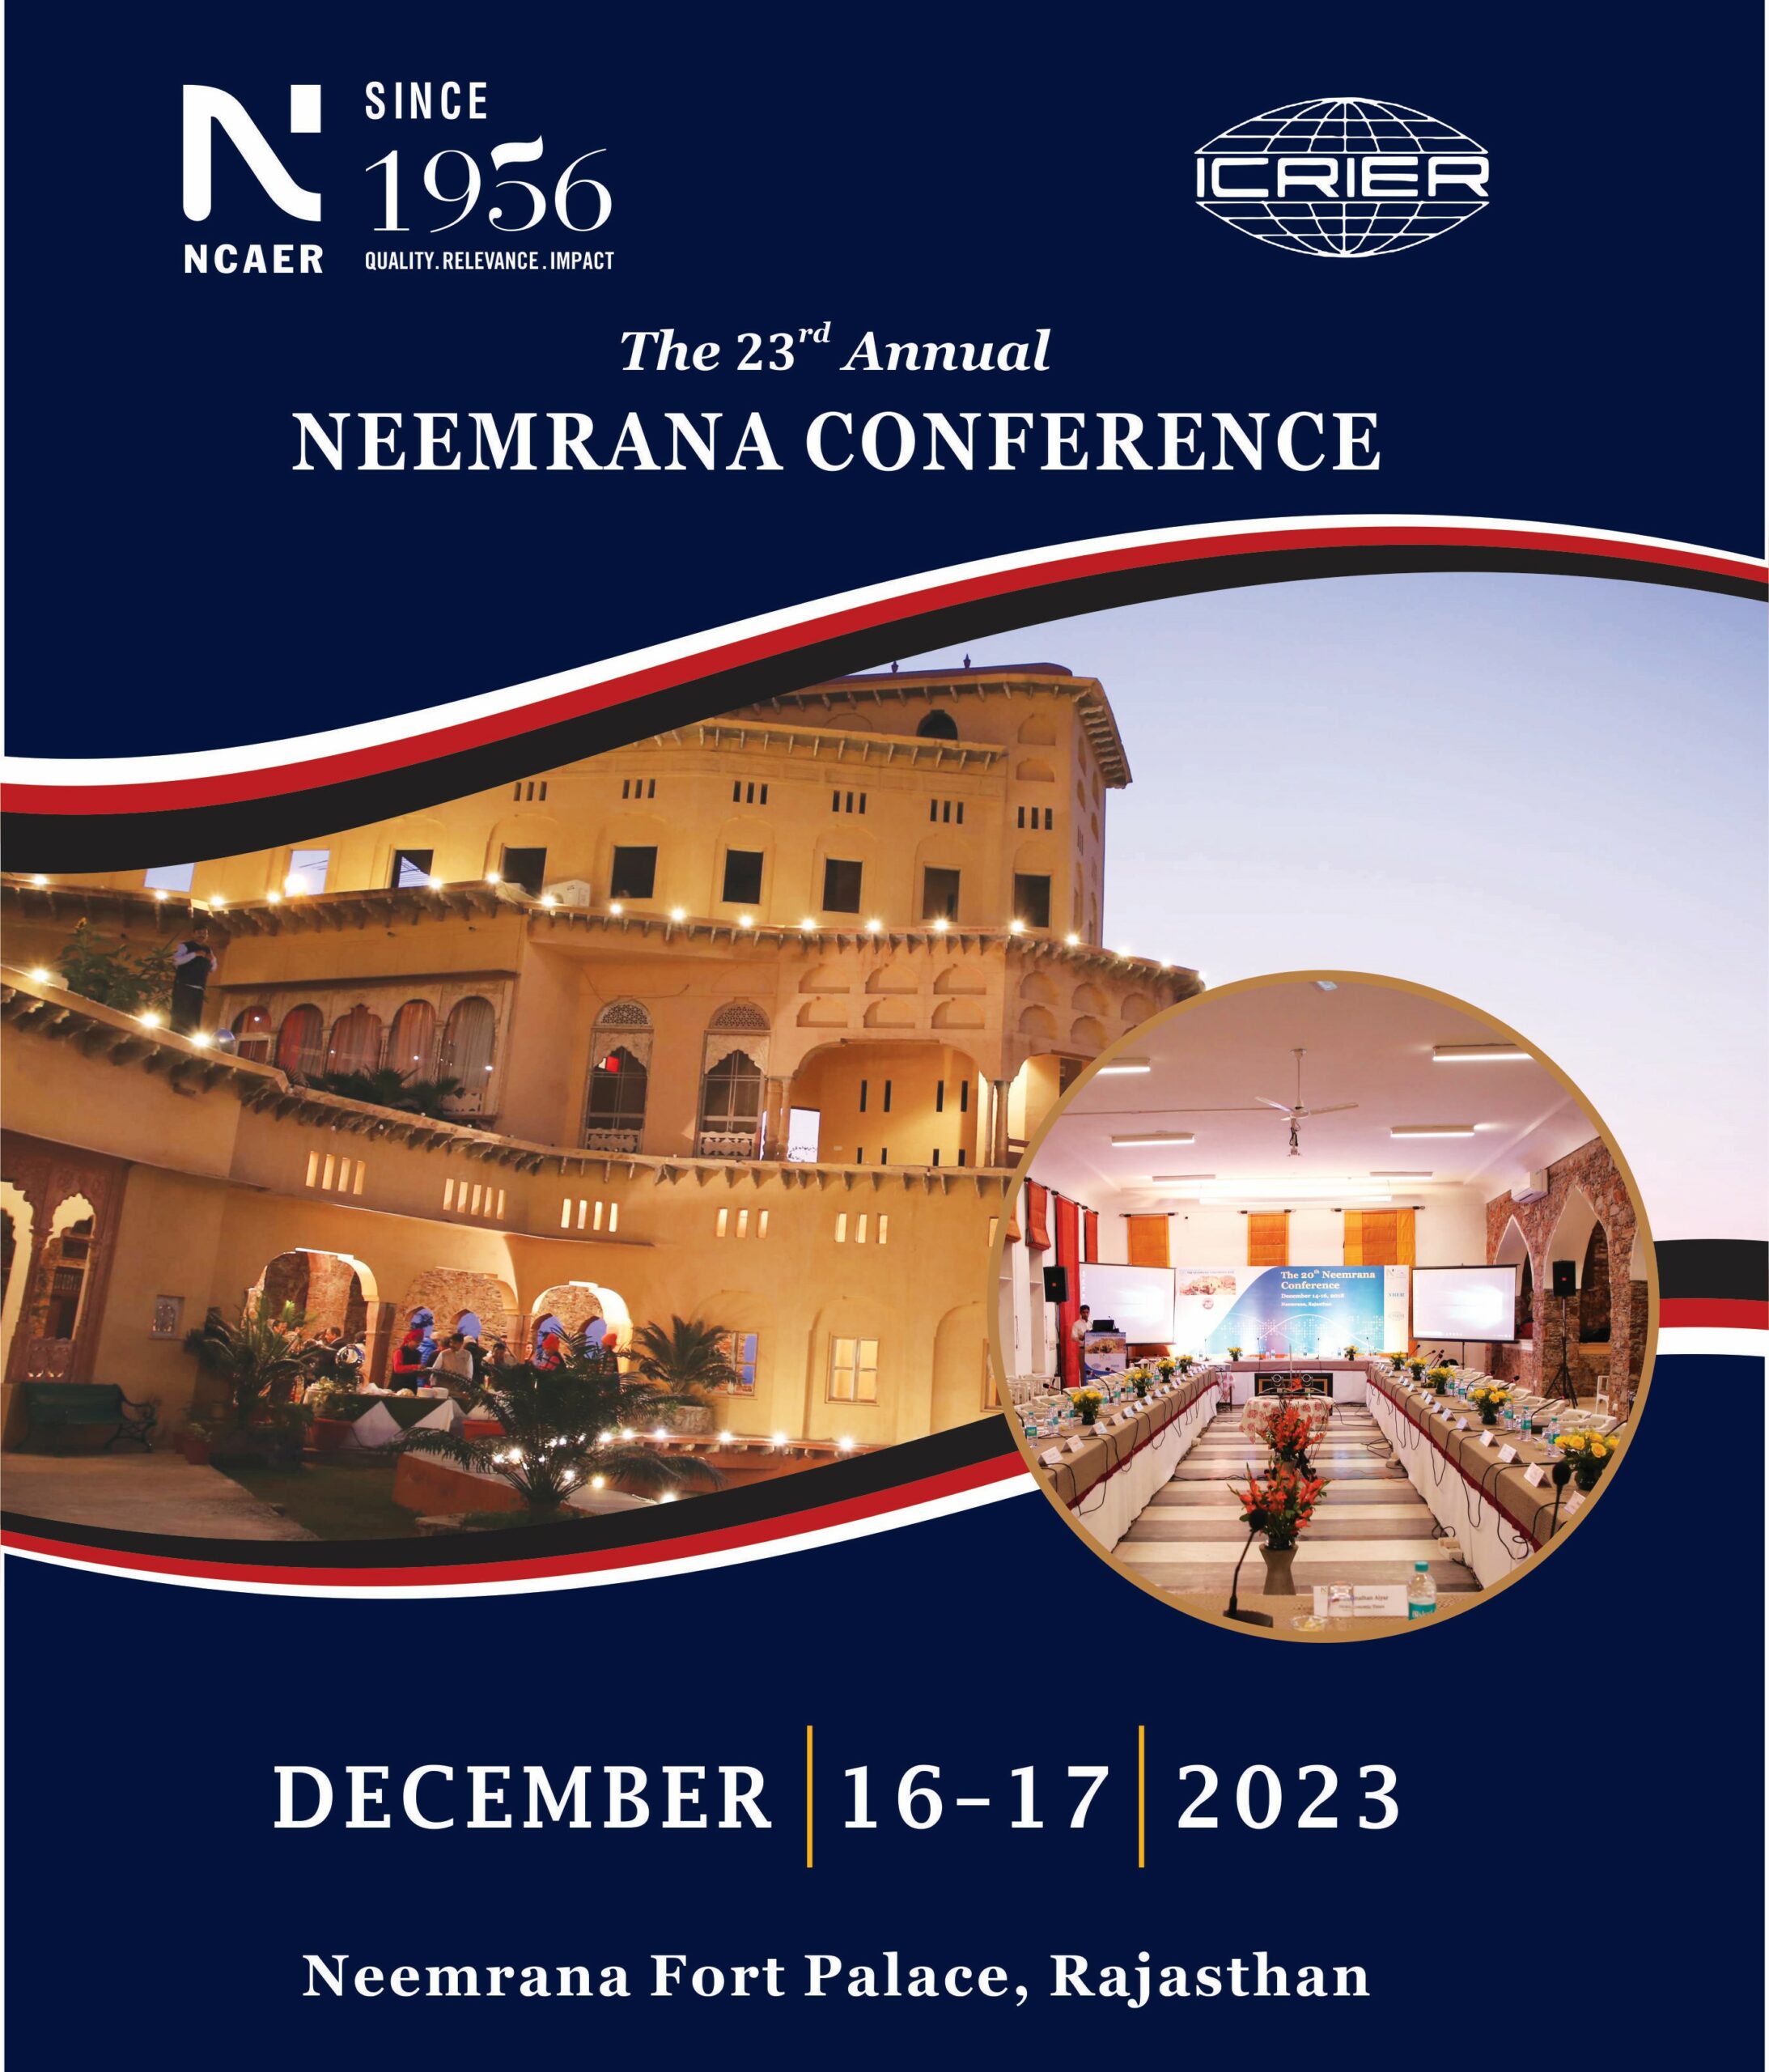 The 23rd Annual Neemrana Conference